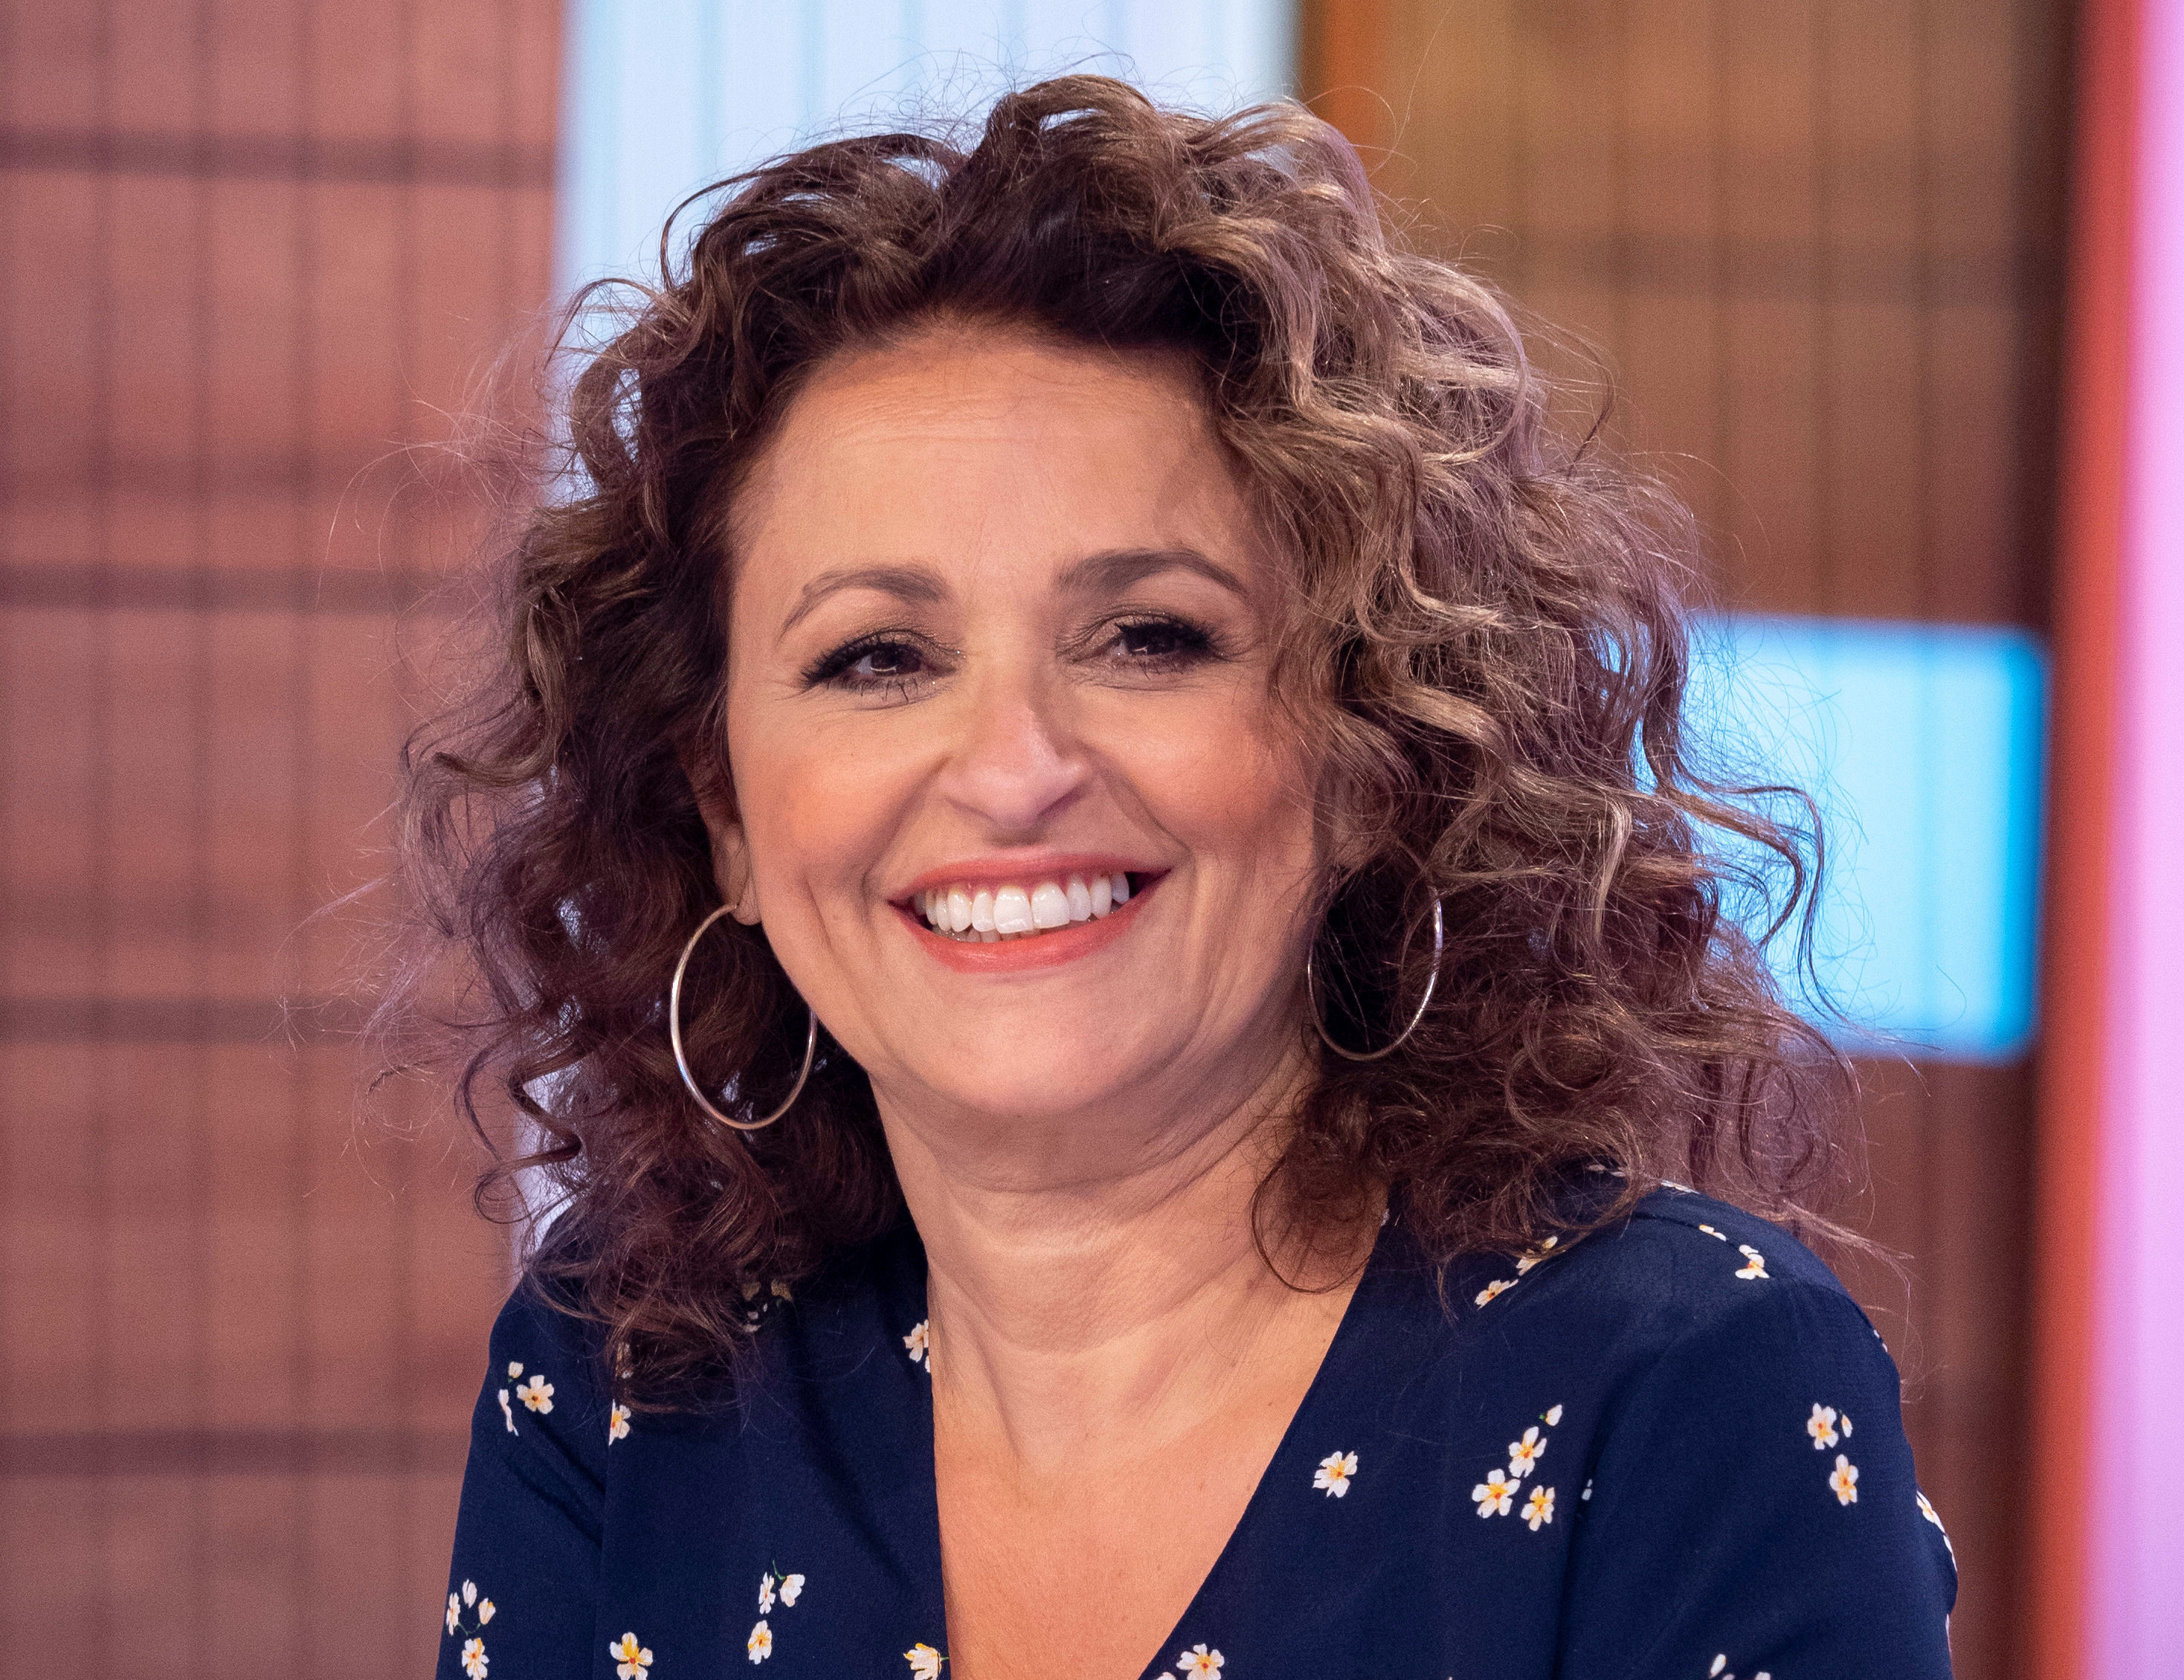 Life was a real drag for Nadia Sawalha - until she managed to stub out smoking.